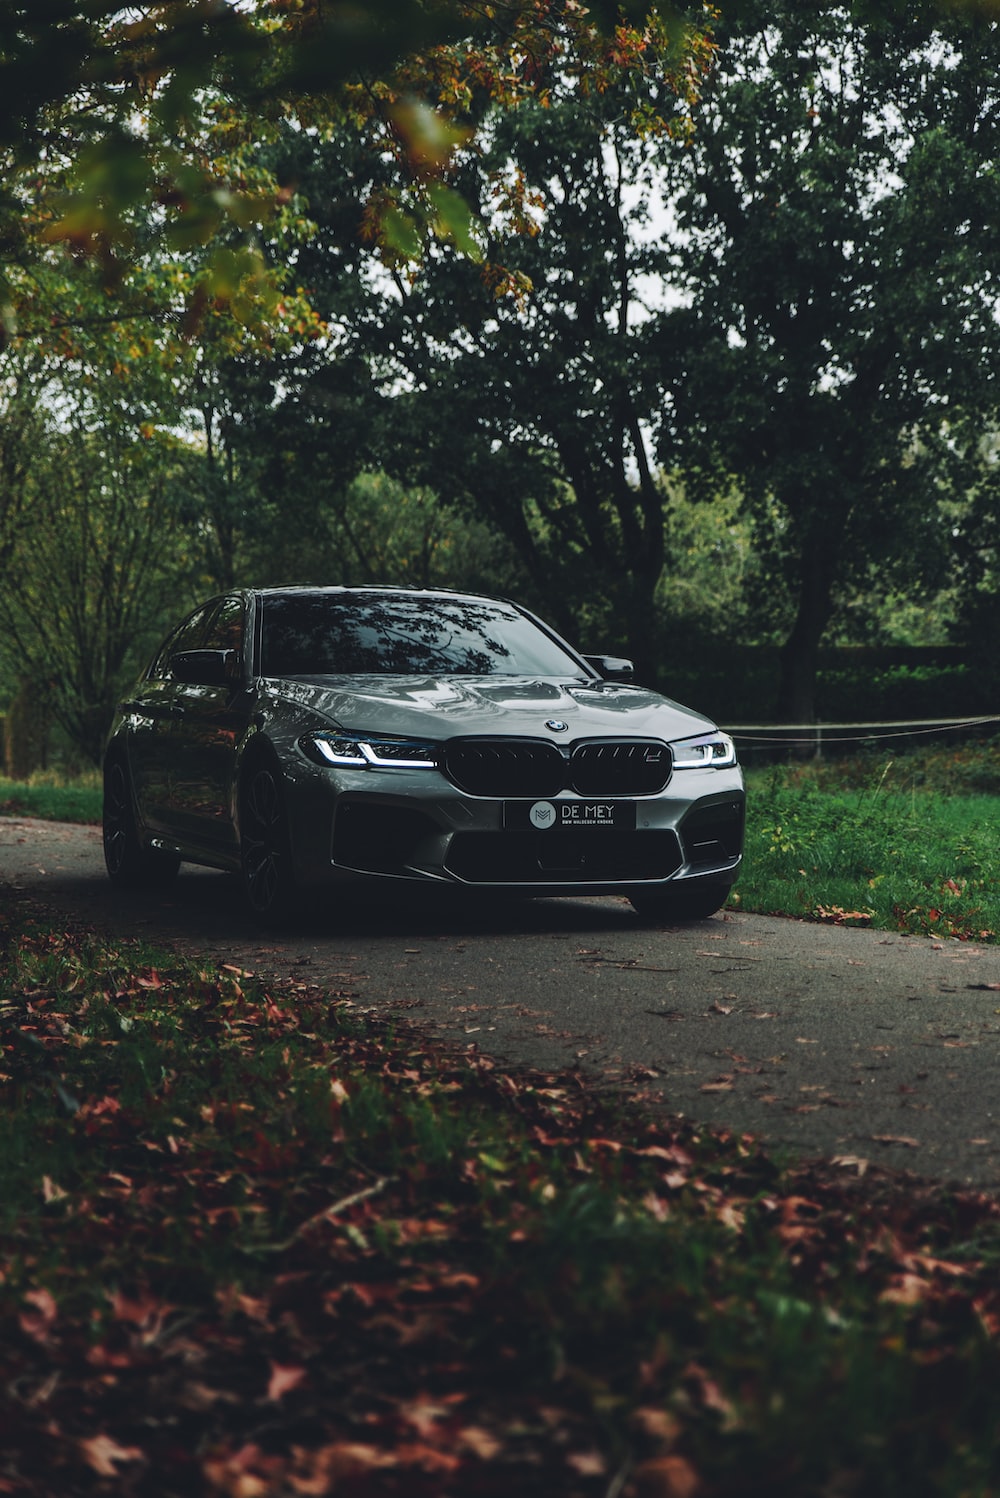 Bmw M5 Pictures | Download Free Images on Unsplash